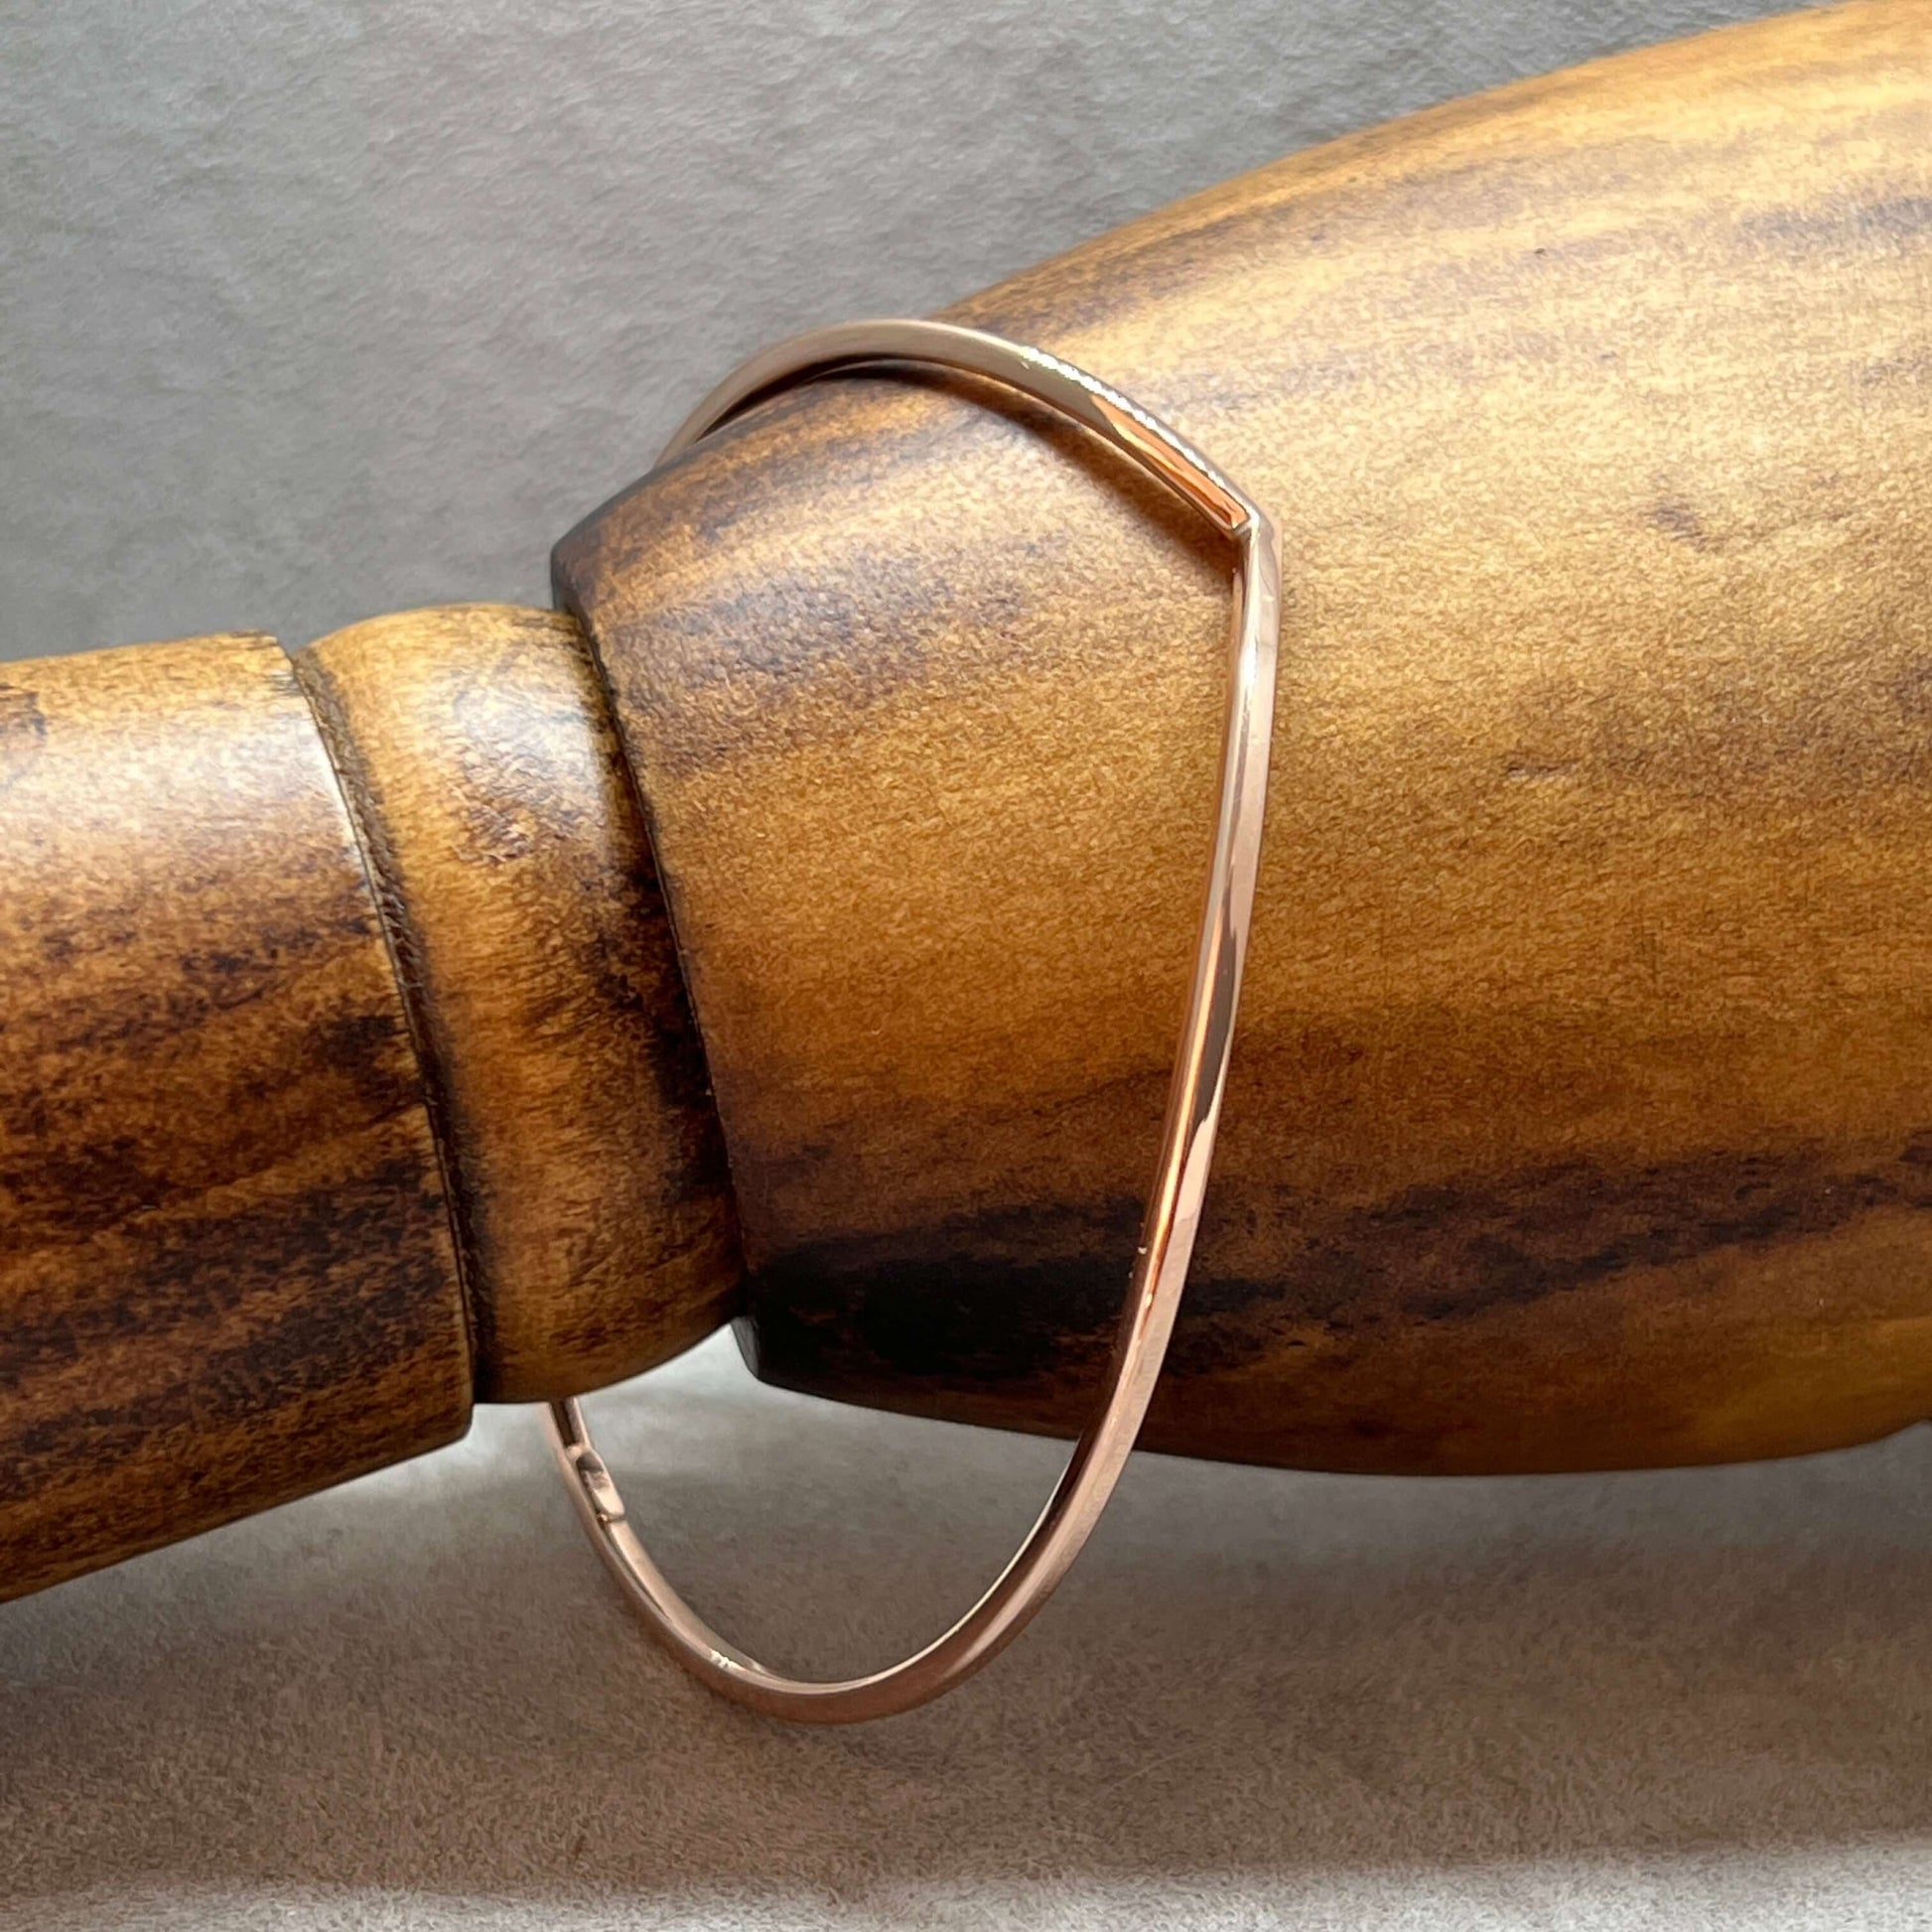 Handmade Sterling Silver Wishbone Bangle in 18 Carat Yellow or Rose Gold Vermeil - Twelve Silver Trees